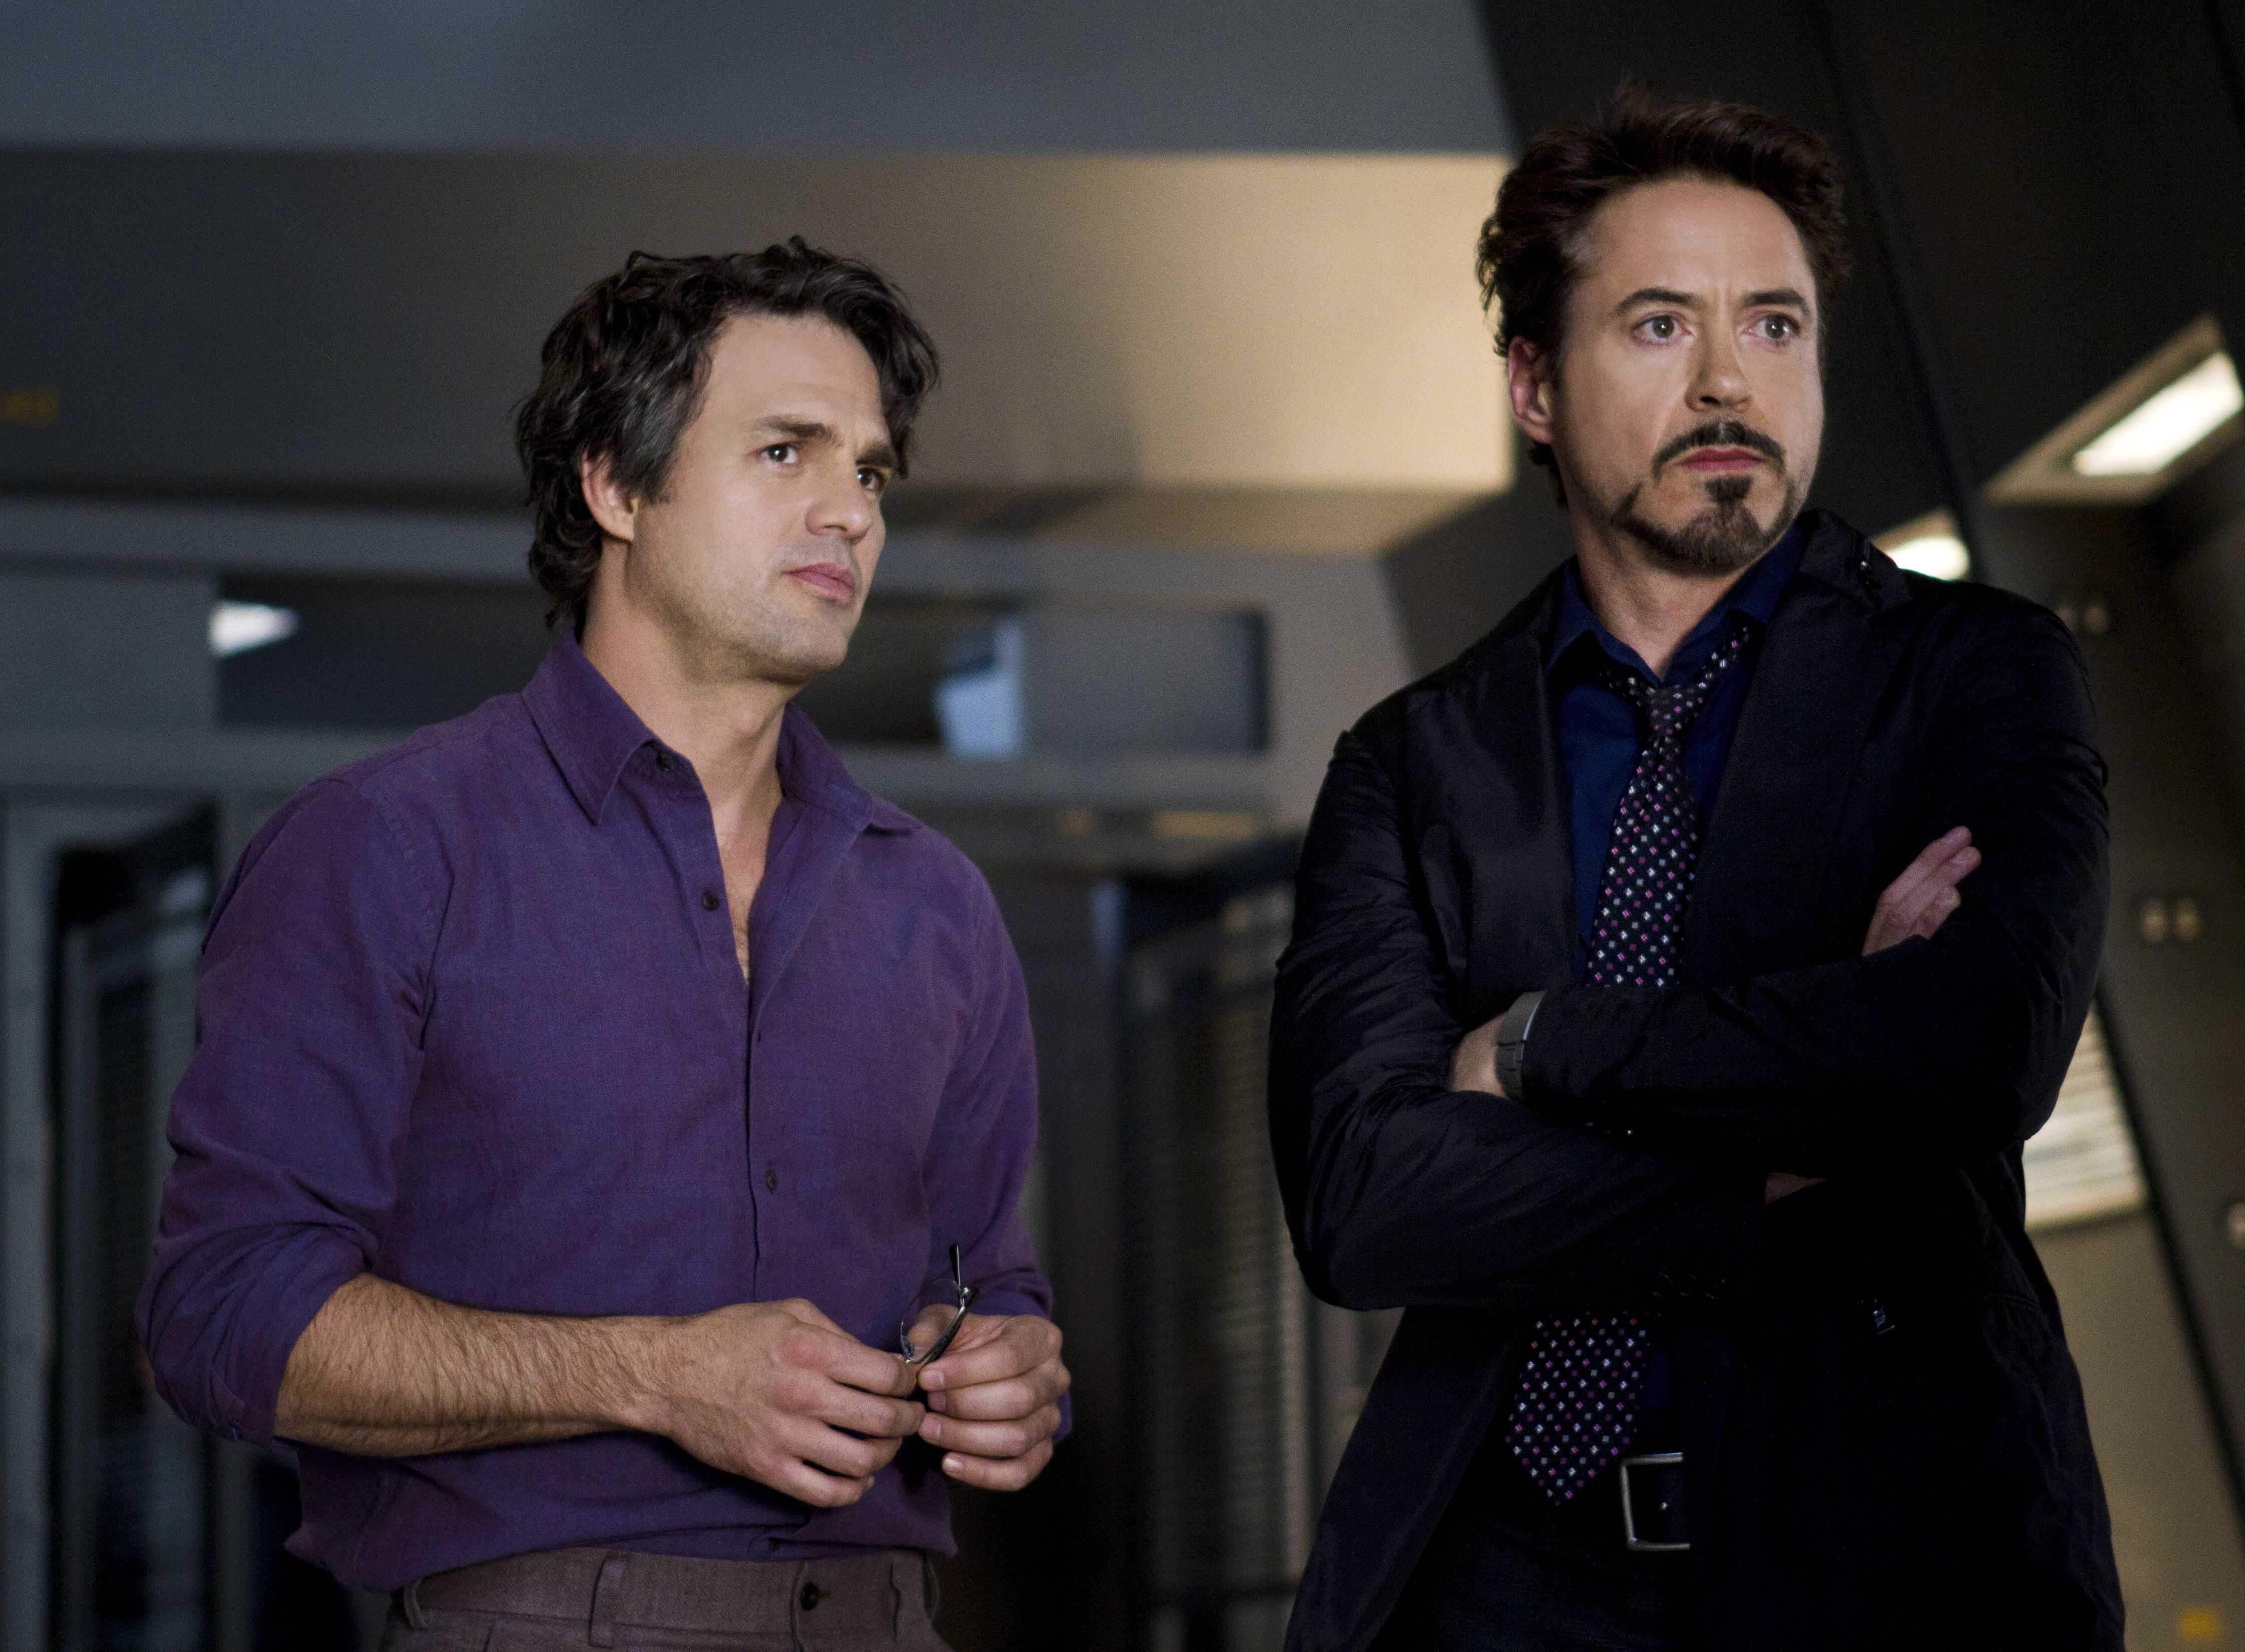 Pals Mark Ruffalo and Robert Downey Jr. in the first Avenger